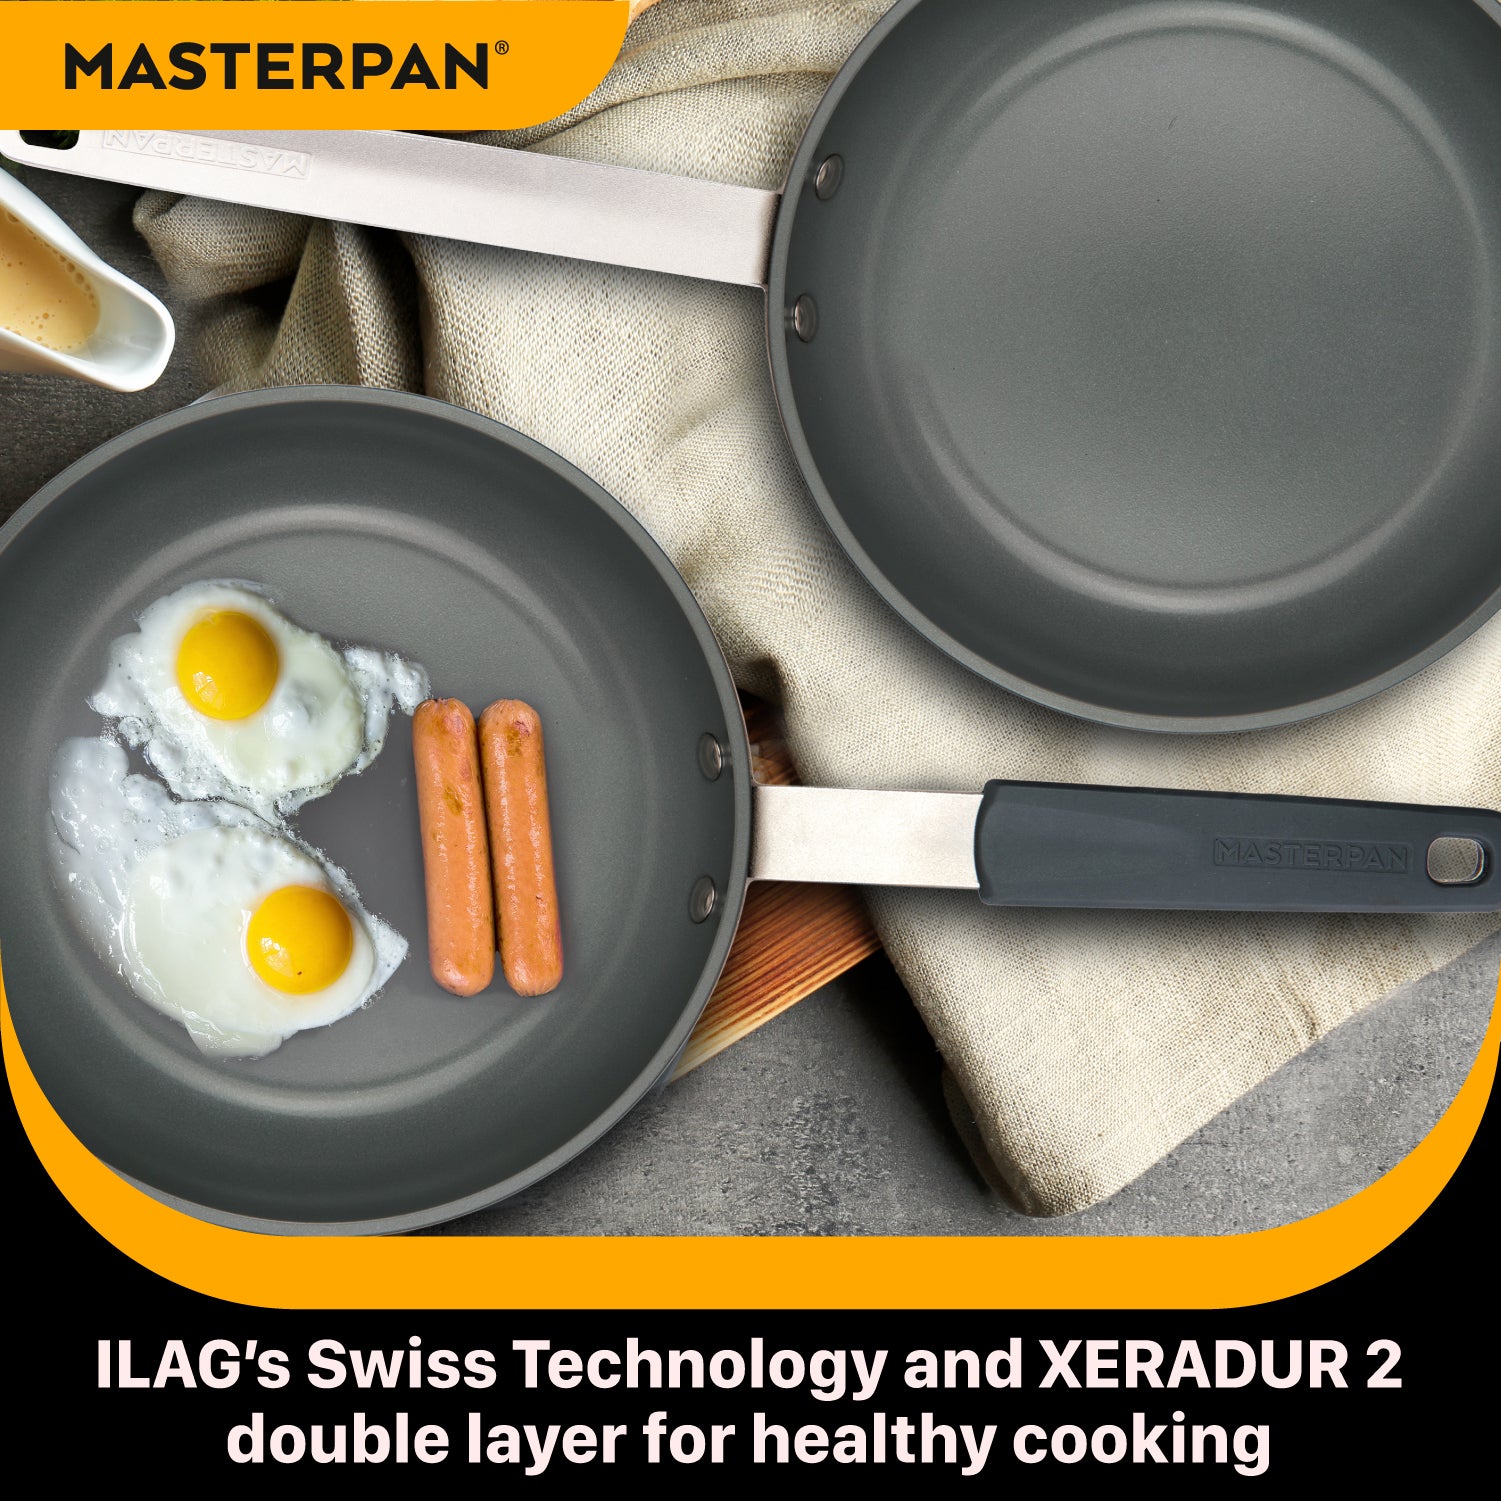 Master Pan 3-Section Non-Stick Skillet – A Full Meal In 1 Pan